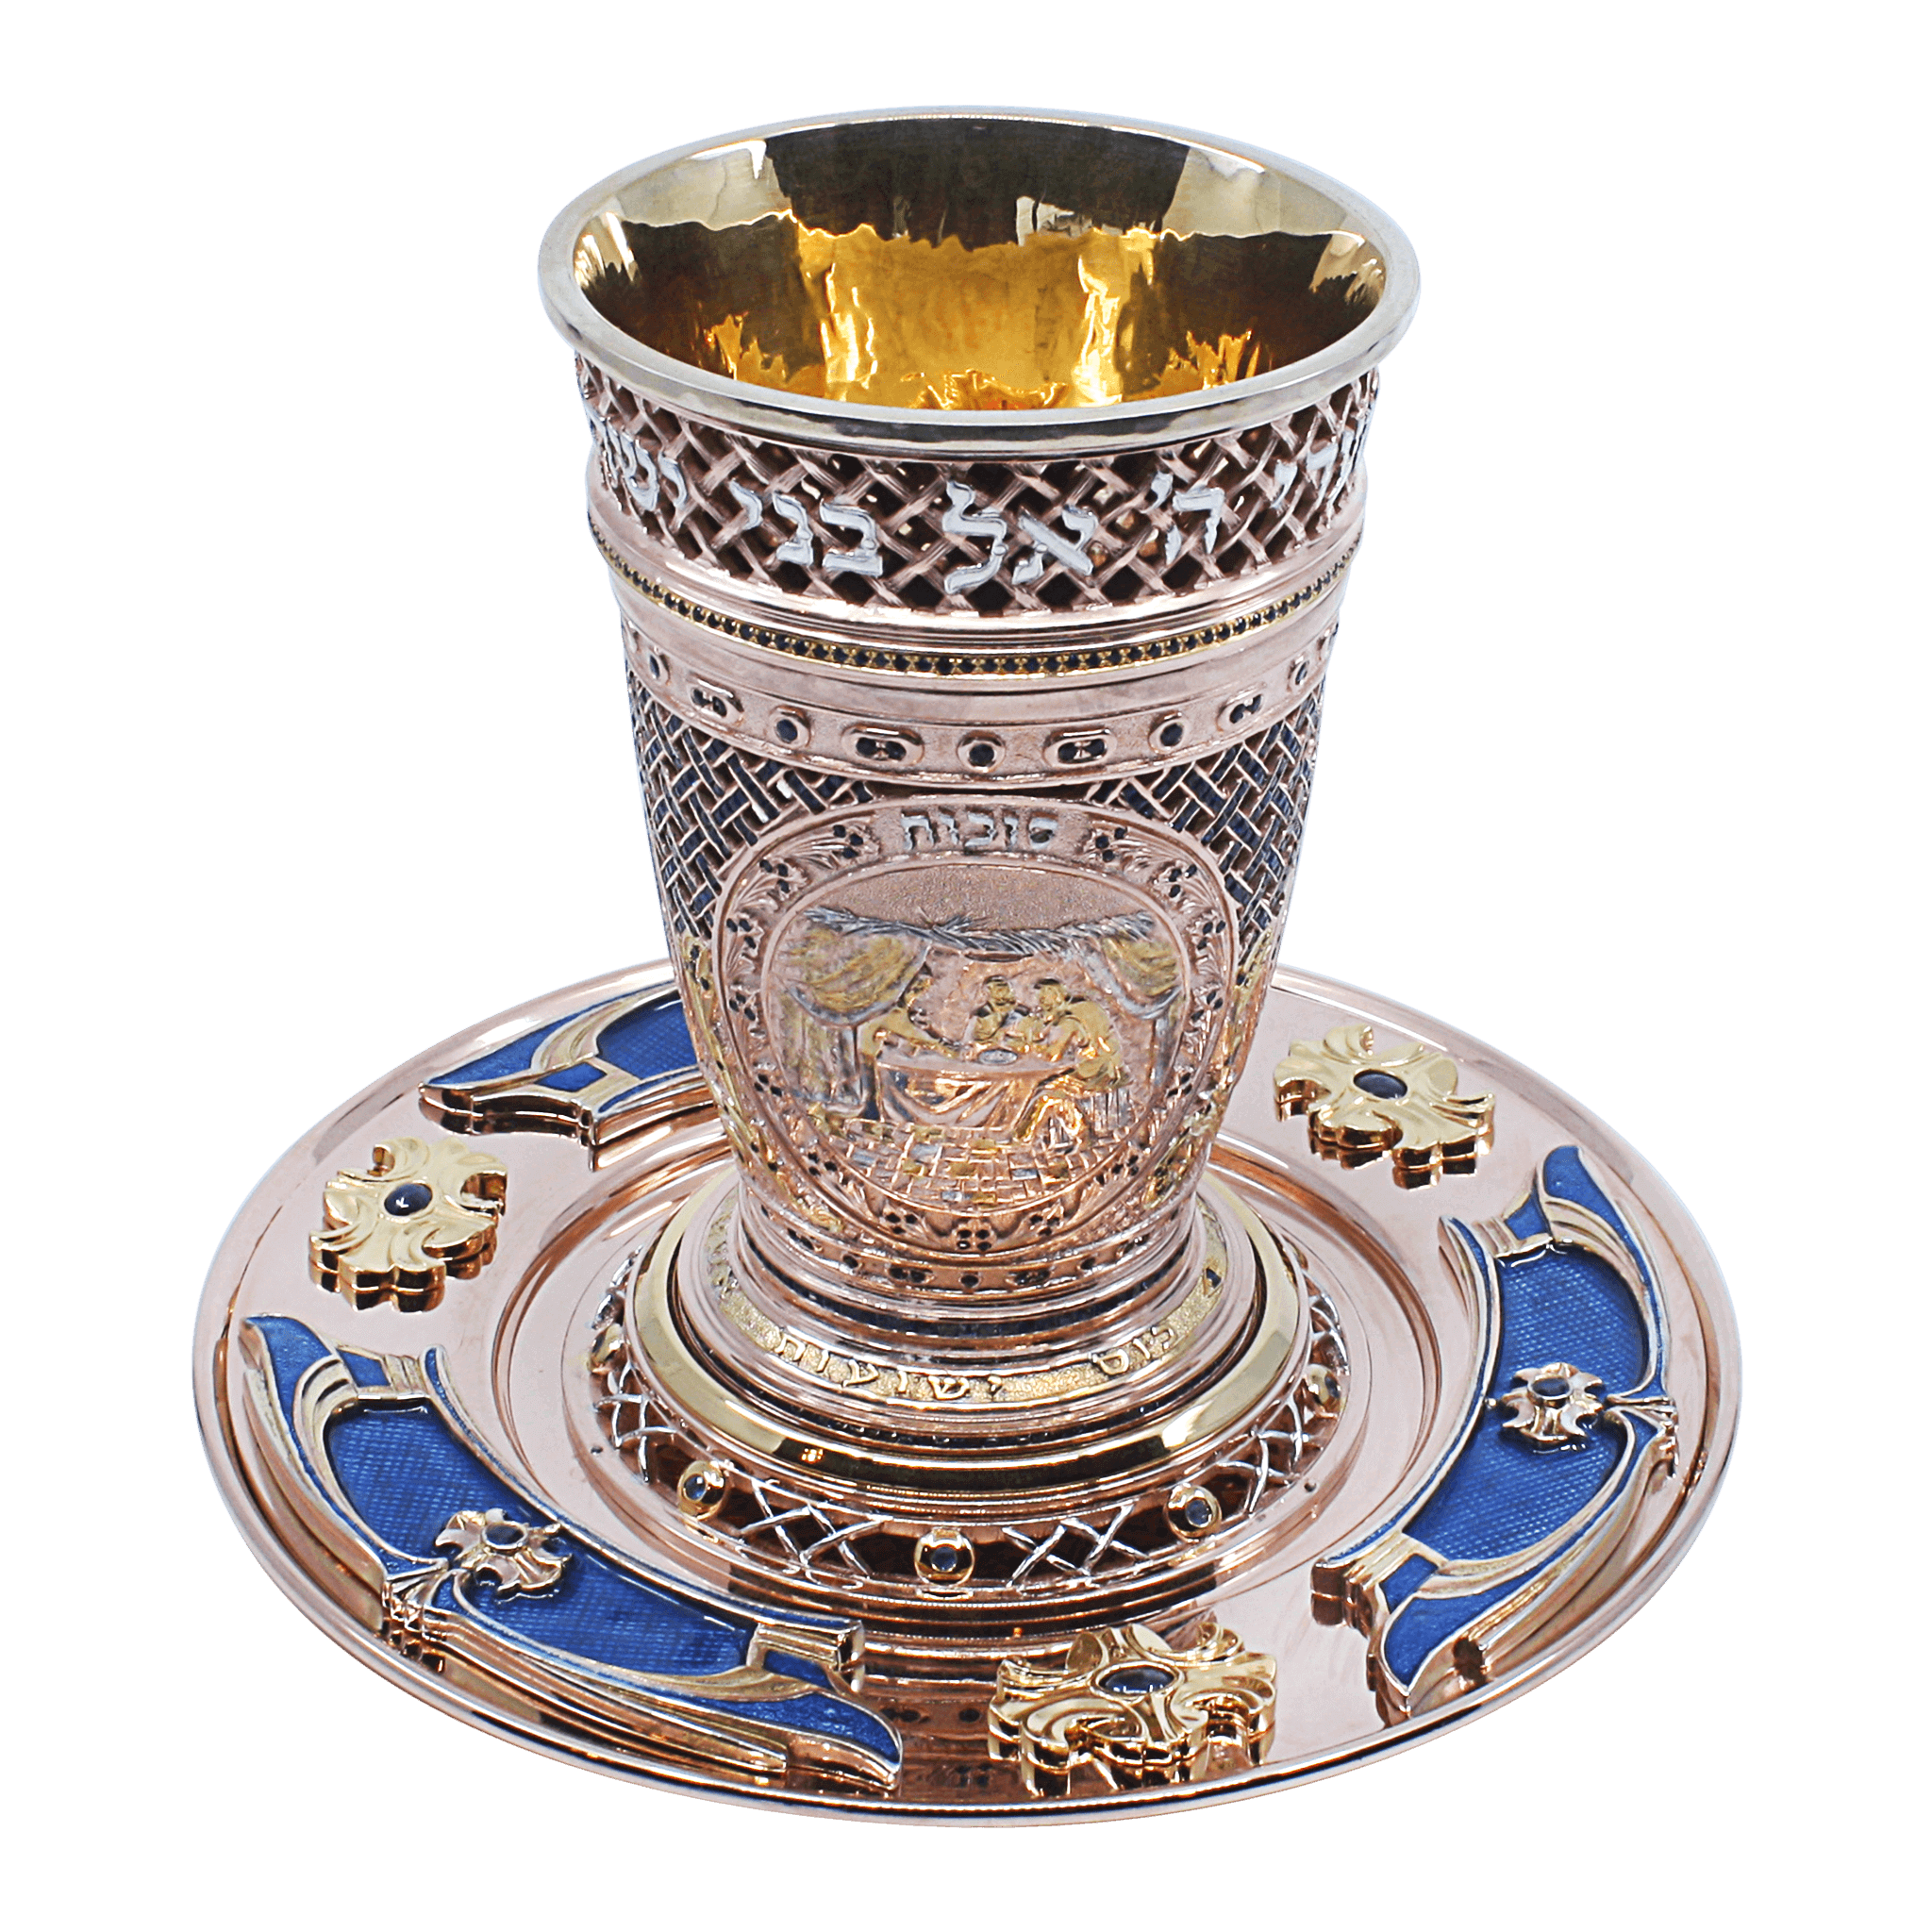 Passover Cup and Plate Set A - Piece By Zion Hadad